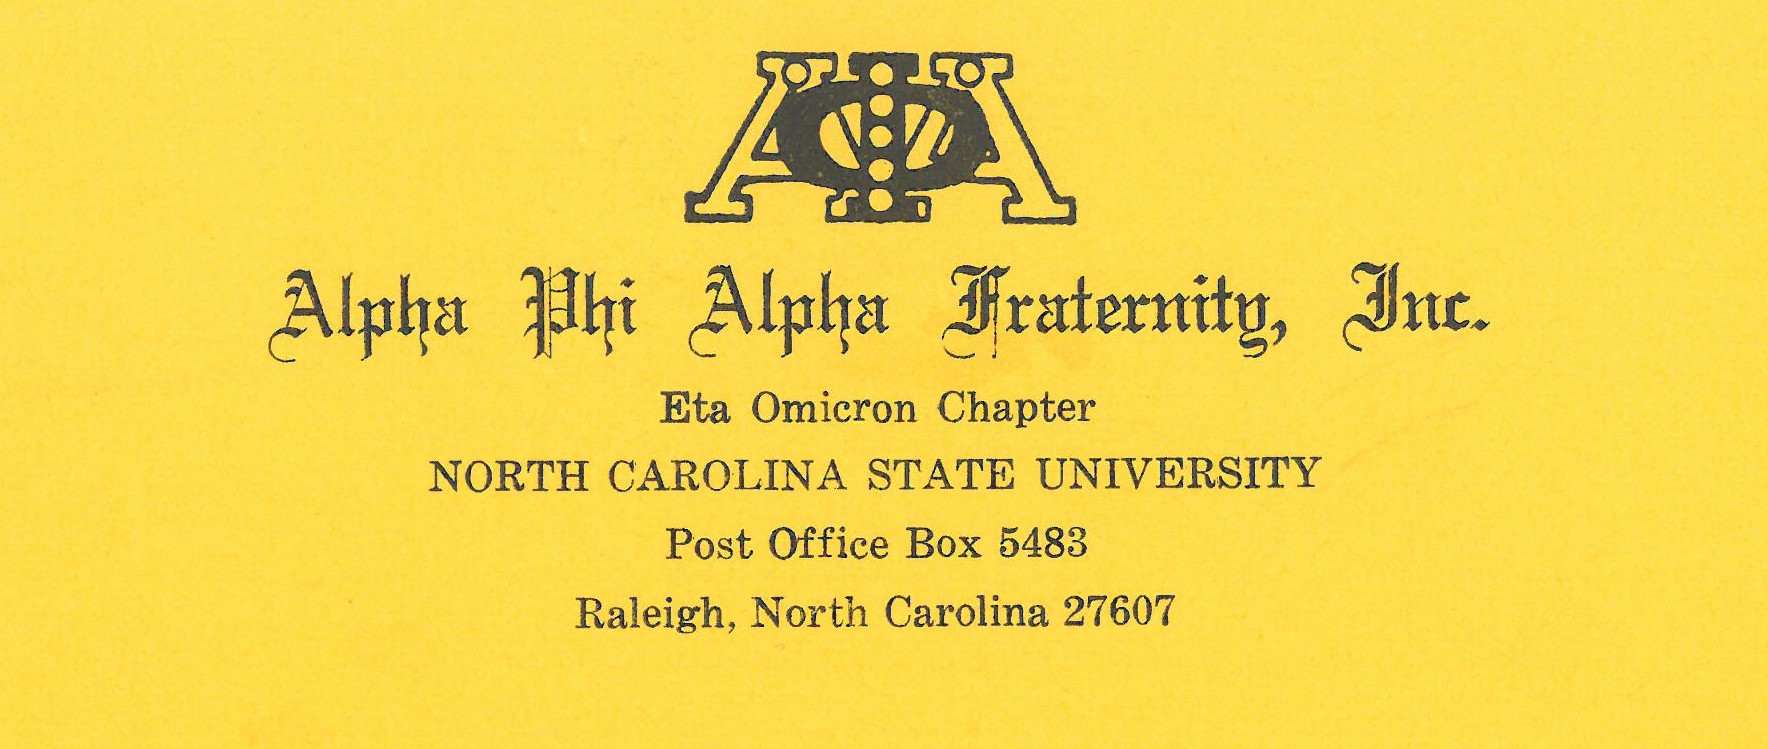 Alpha Phi Alpha letterhead, used in the Black and Gold newsletter, 1972.  From UA 021.001, Legal Box 1, Folder 21.